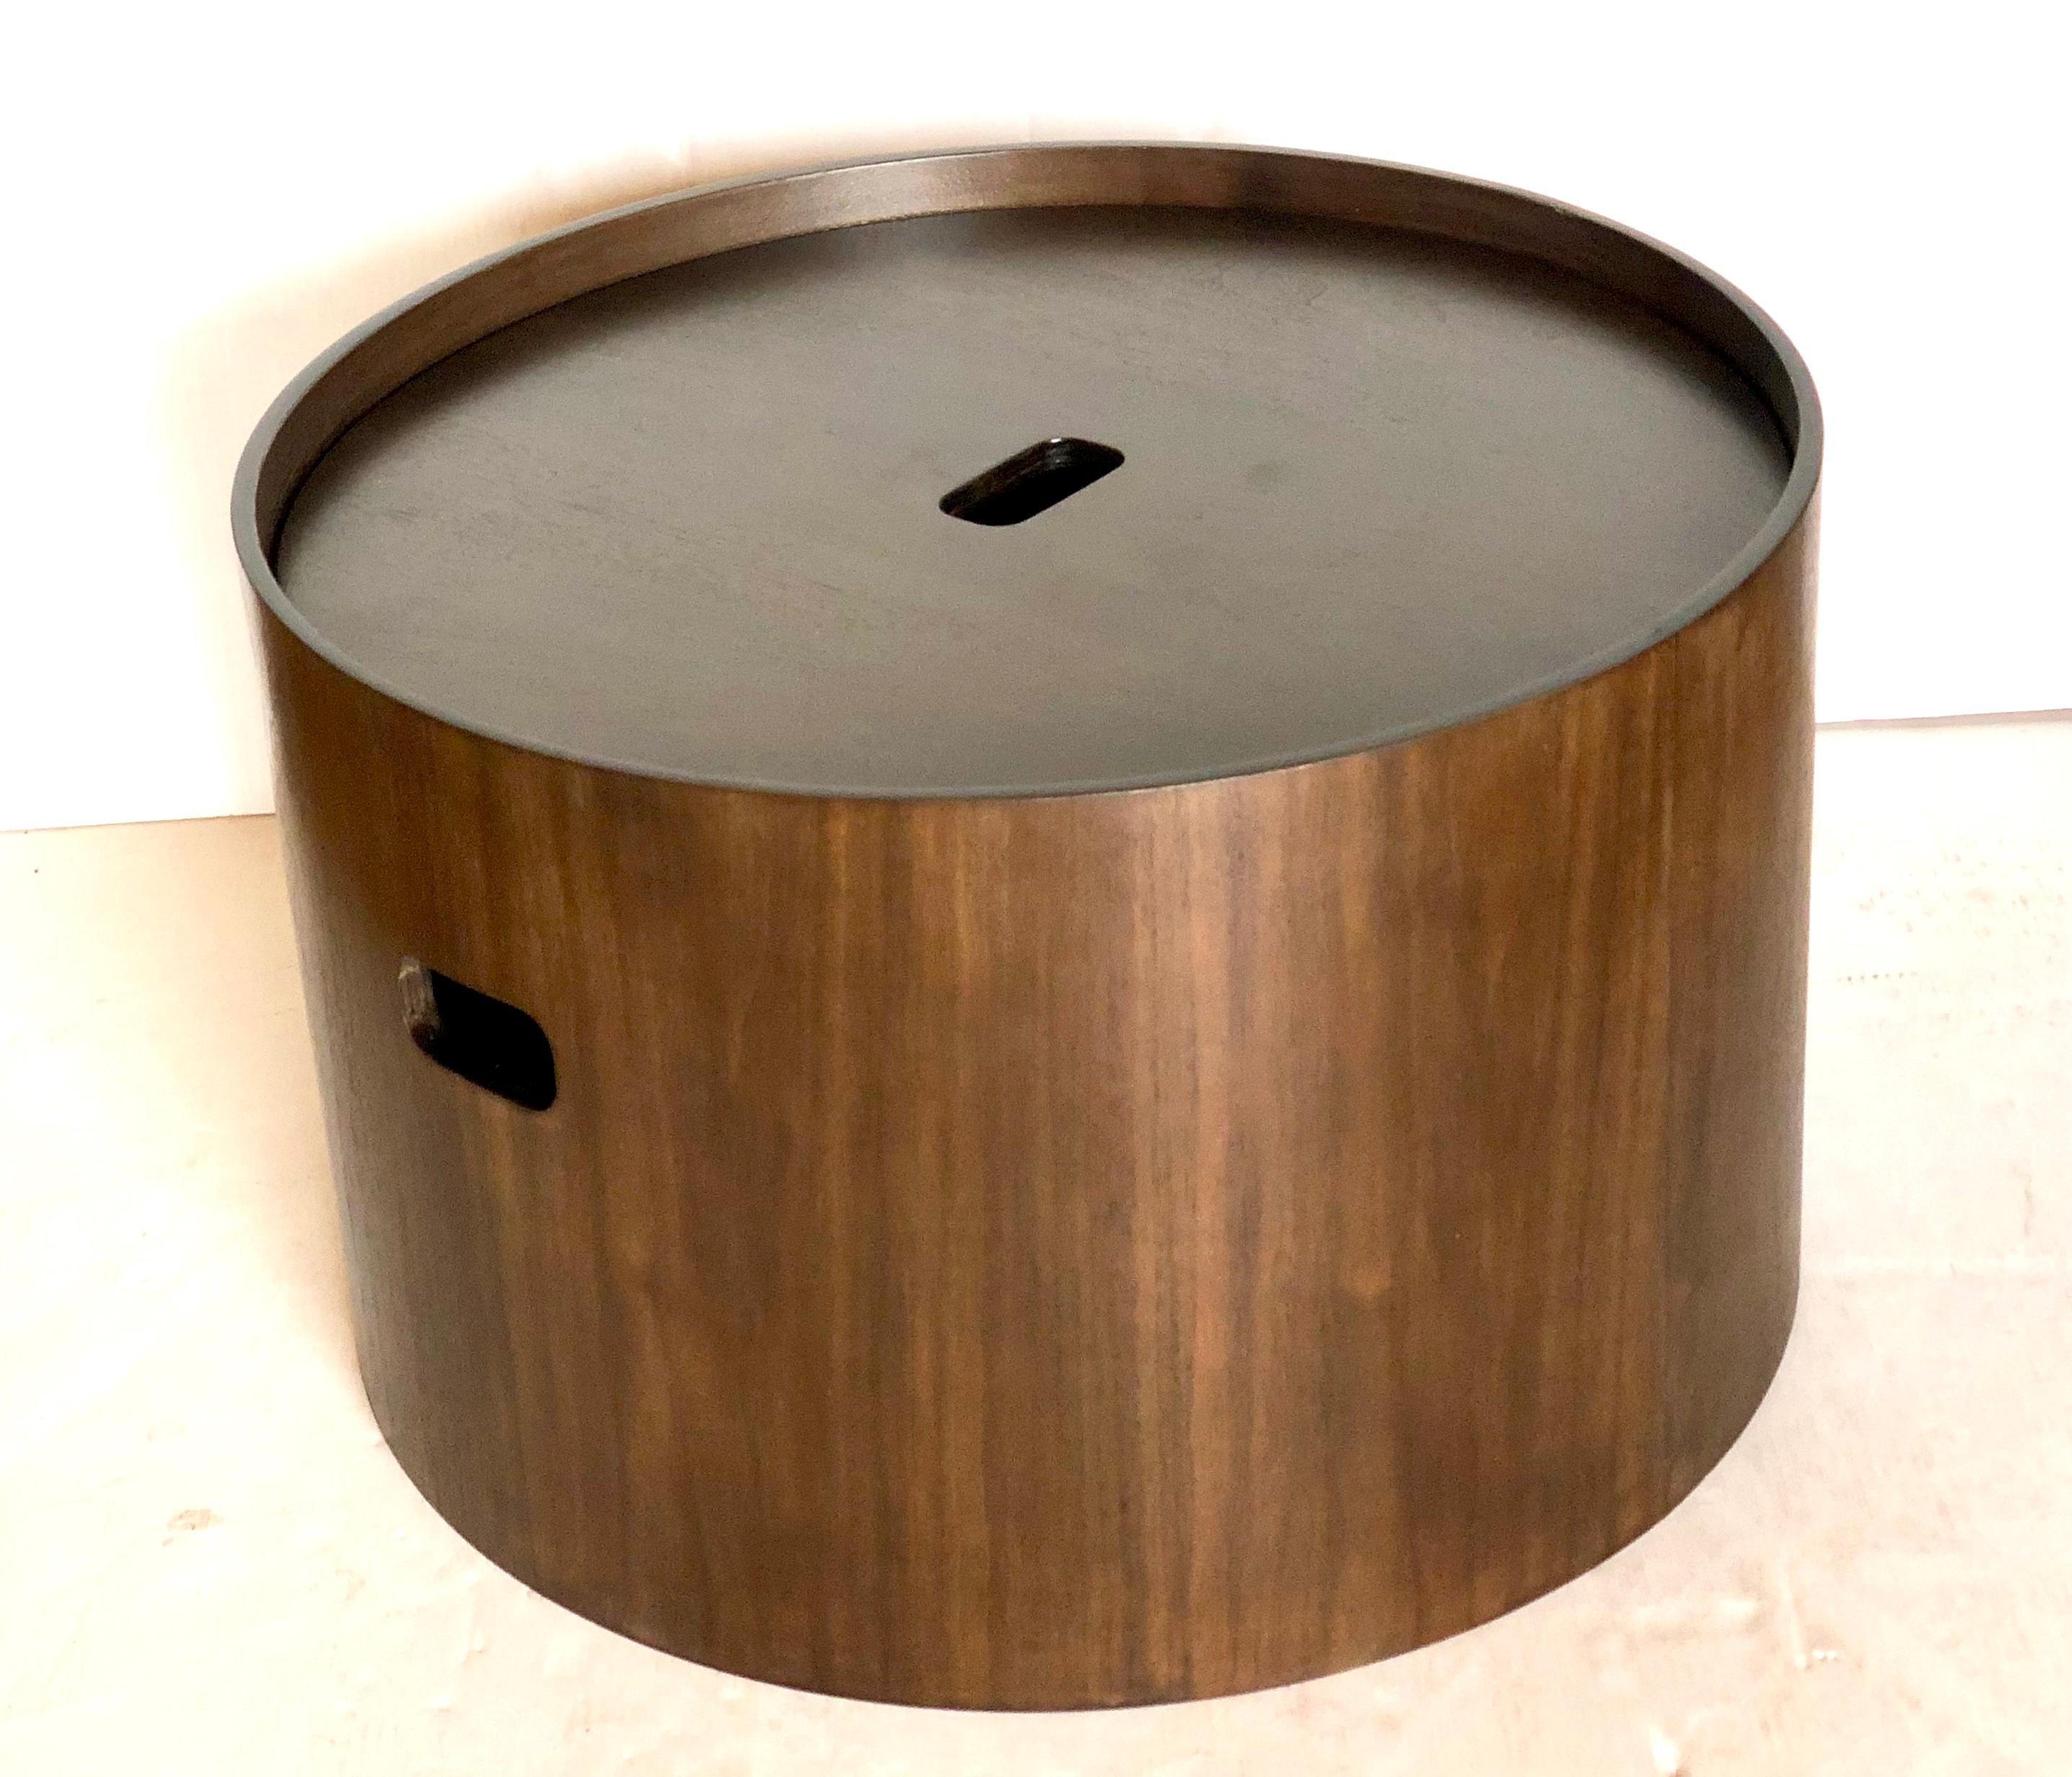 Freshly refinished in dark walnut round cylinder coffee table/ storage bin, with lid great and practical design.